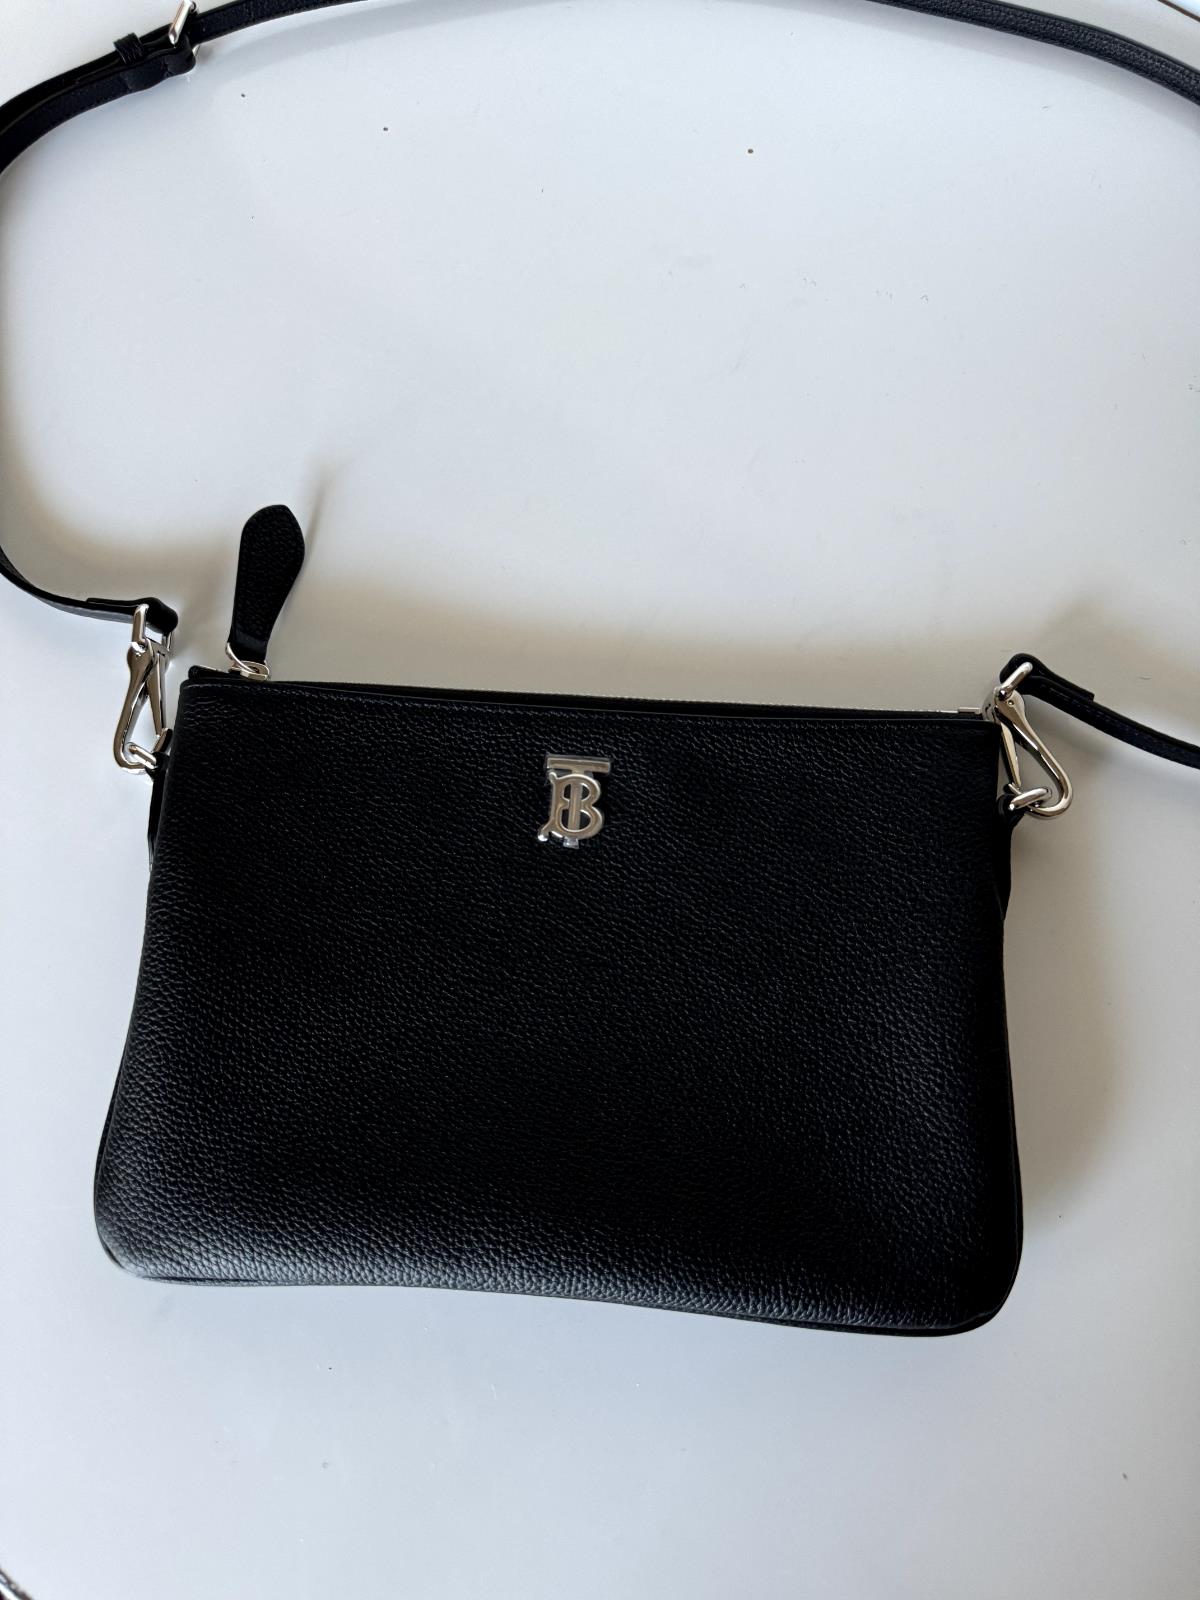 NWT $530 Burberry Peyton Leather Shoulder Bag Black 80751751 Made in Italy